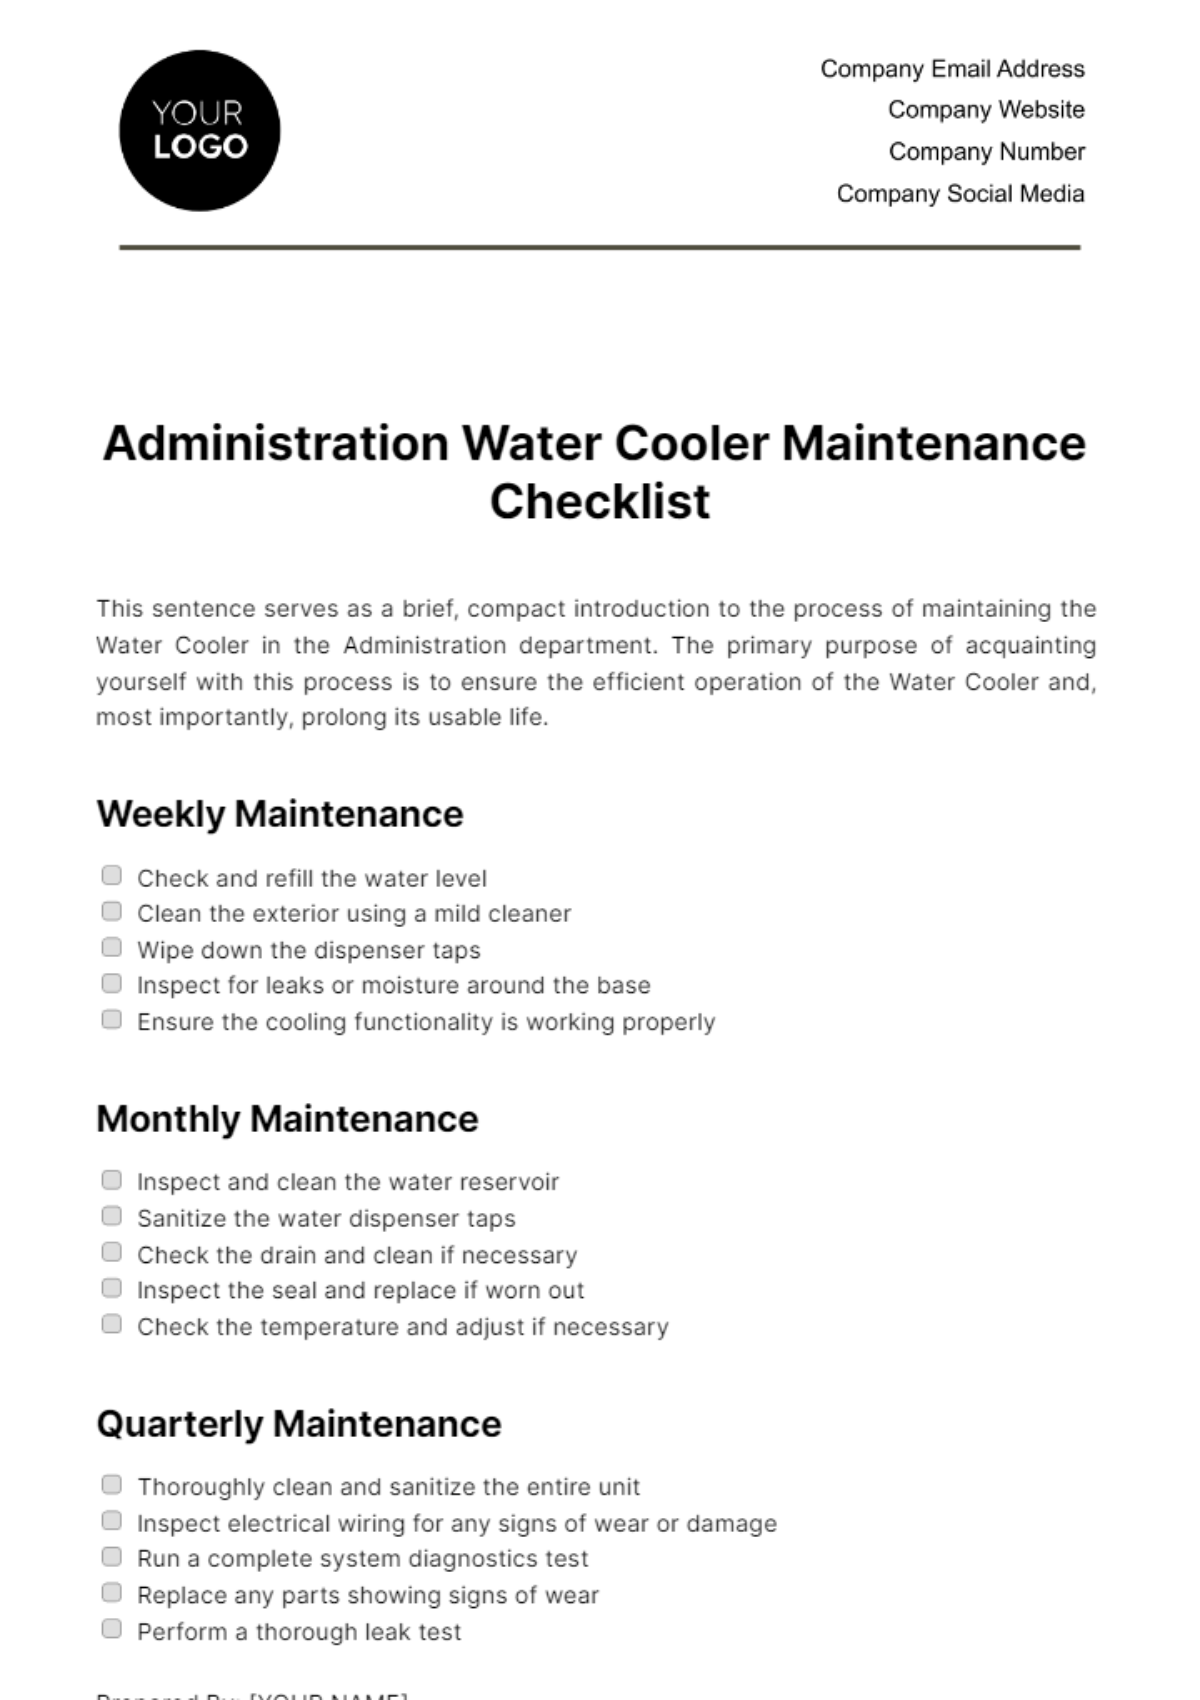 Free Administration Water Cooler Maintenance Checklist Template